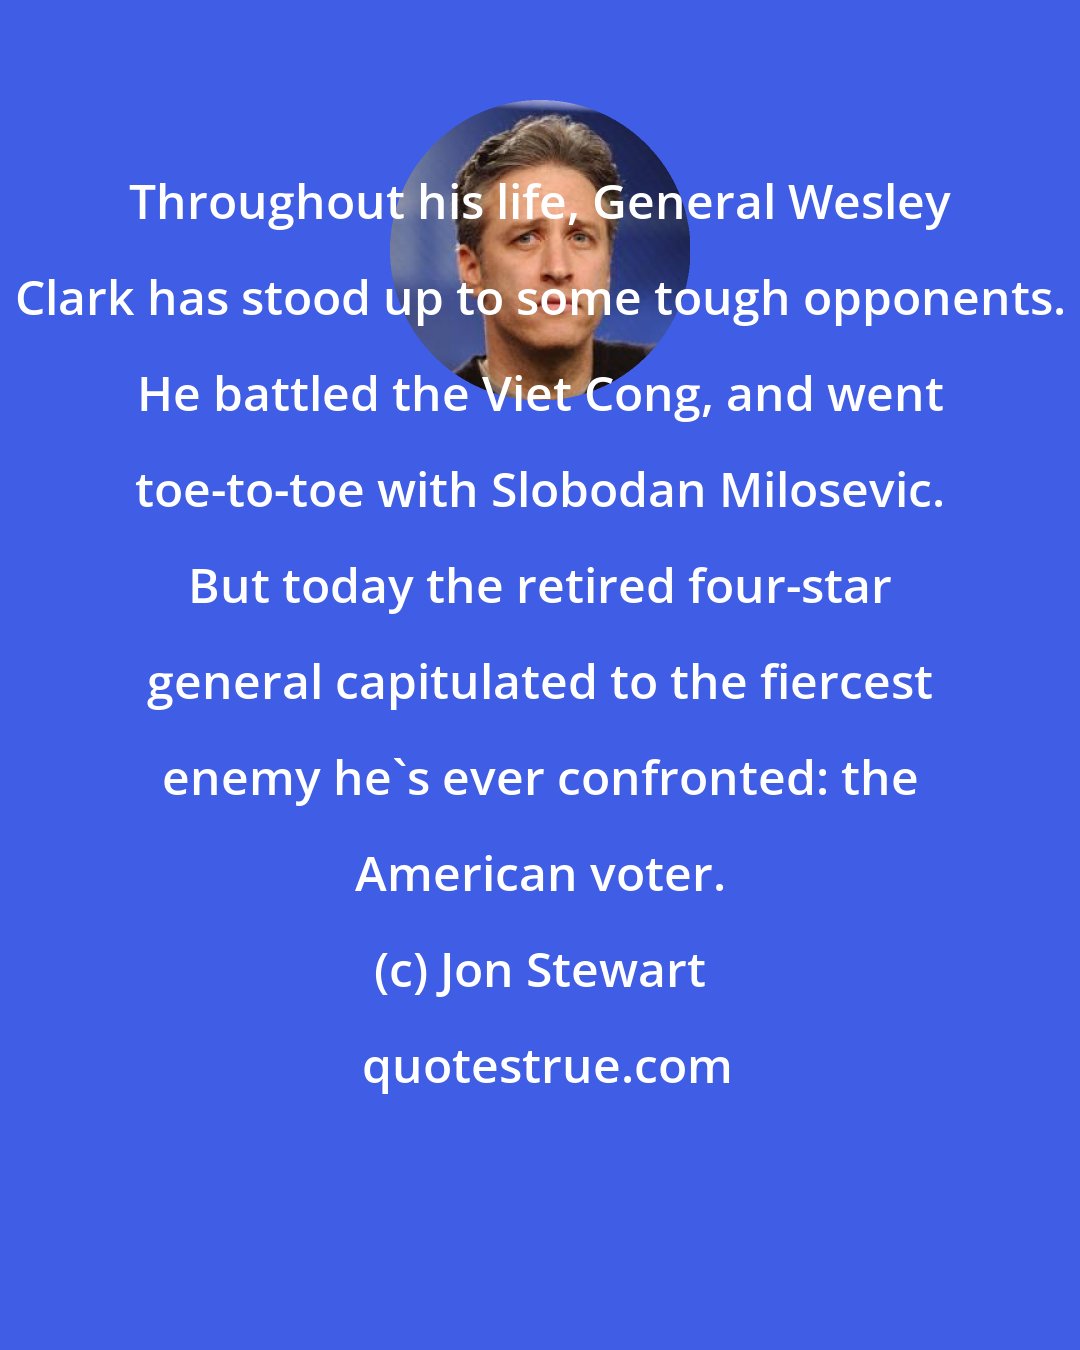 Jon Stewart: Throughout his life, General Wesley Clark has stood up to some tough opponents. He battled the Viet Cong, and went toe-to-toe with Slobodan Milosevic. But today the retired four-star general capitulated to the fiercest enemy he's ever confronted: the American voter.